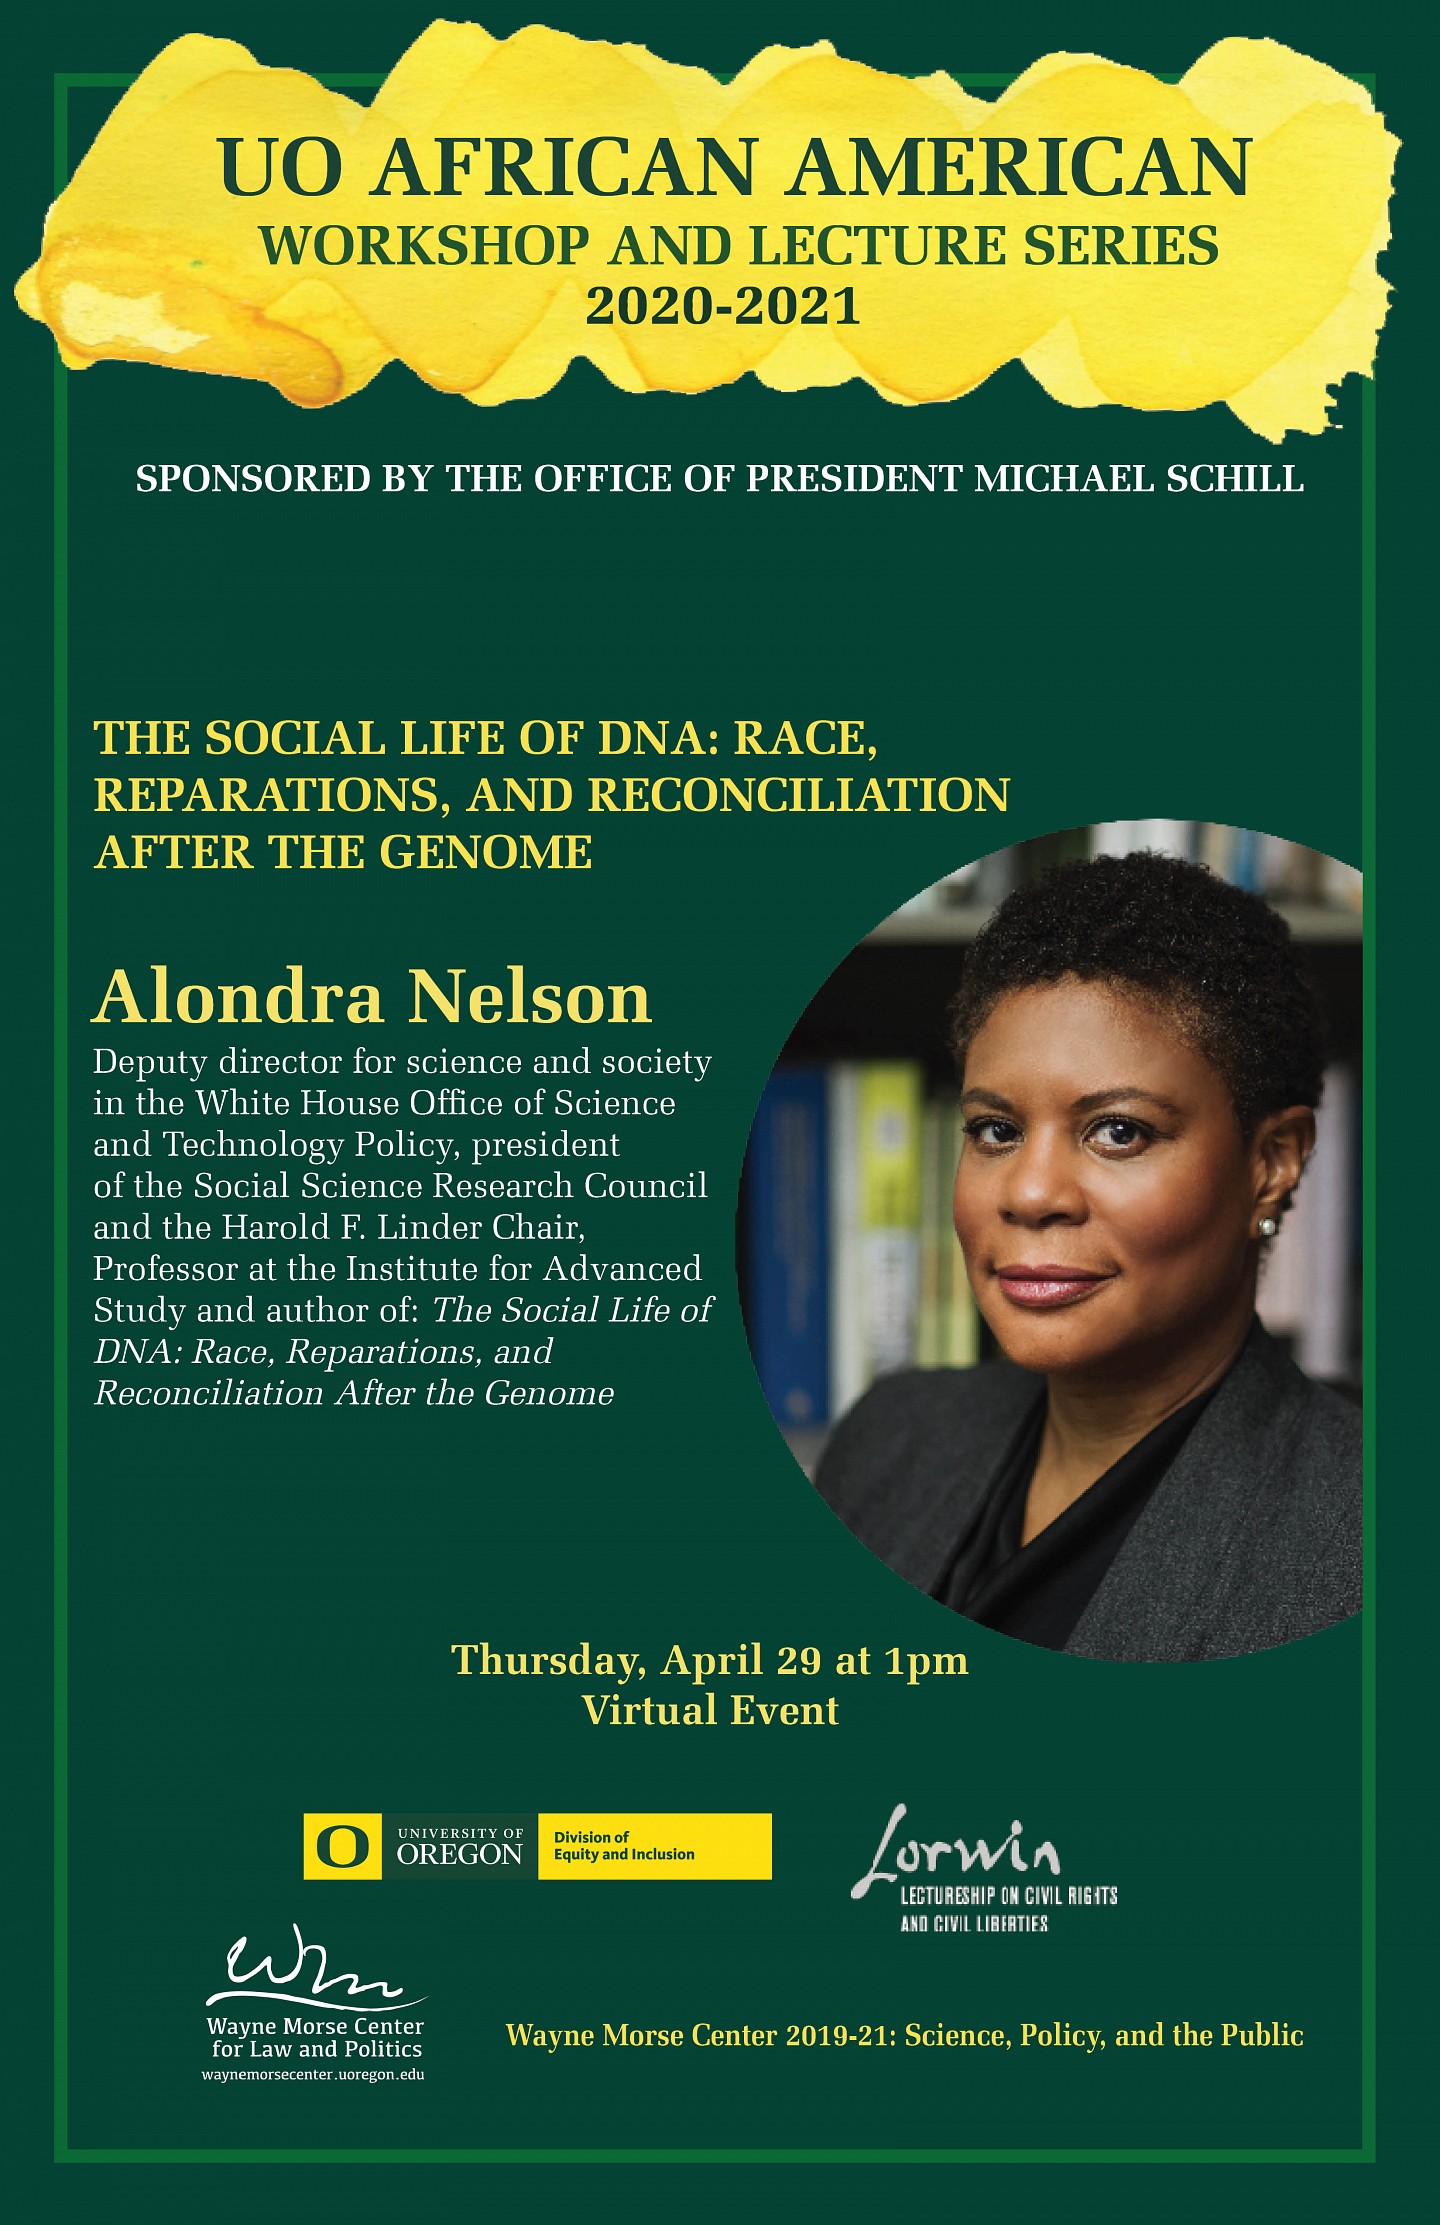  The Social Life of DNA: Race, Reparations, and Reconciliation after the Genome, with Alondra Nelson  Thursday, April 29 at 1:00pm to 2:30pm Virtual Event 